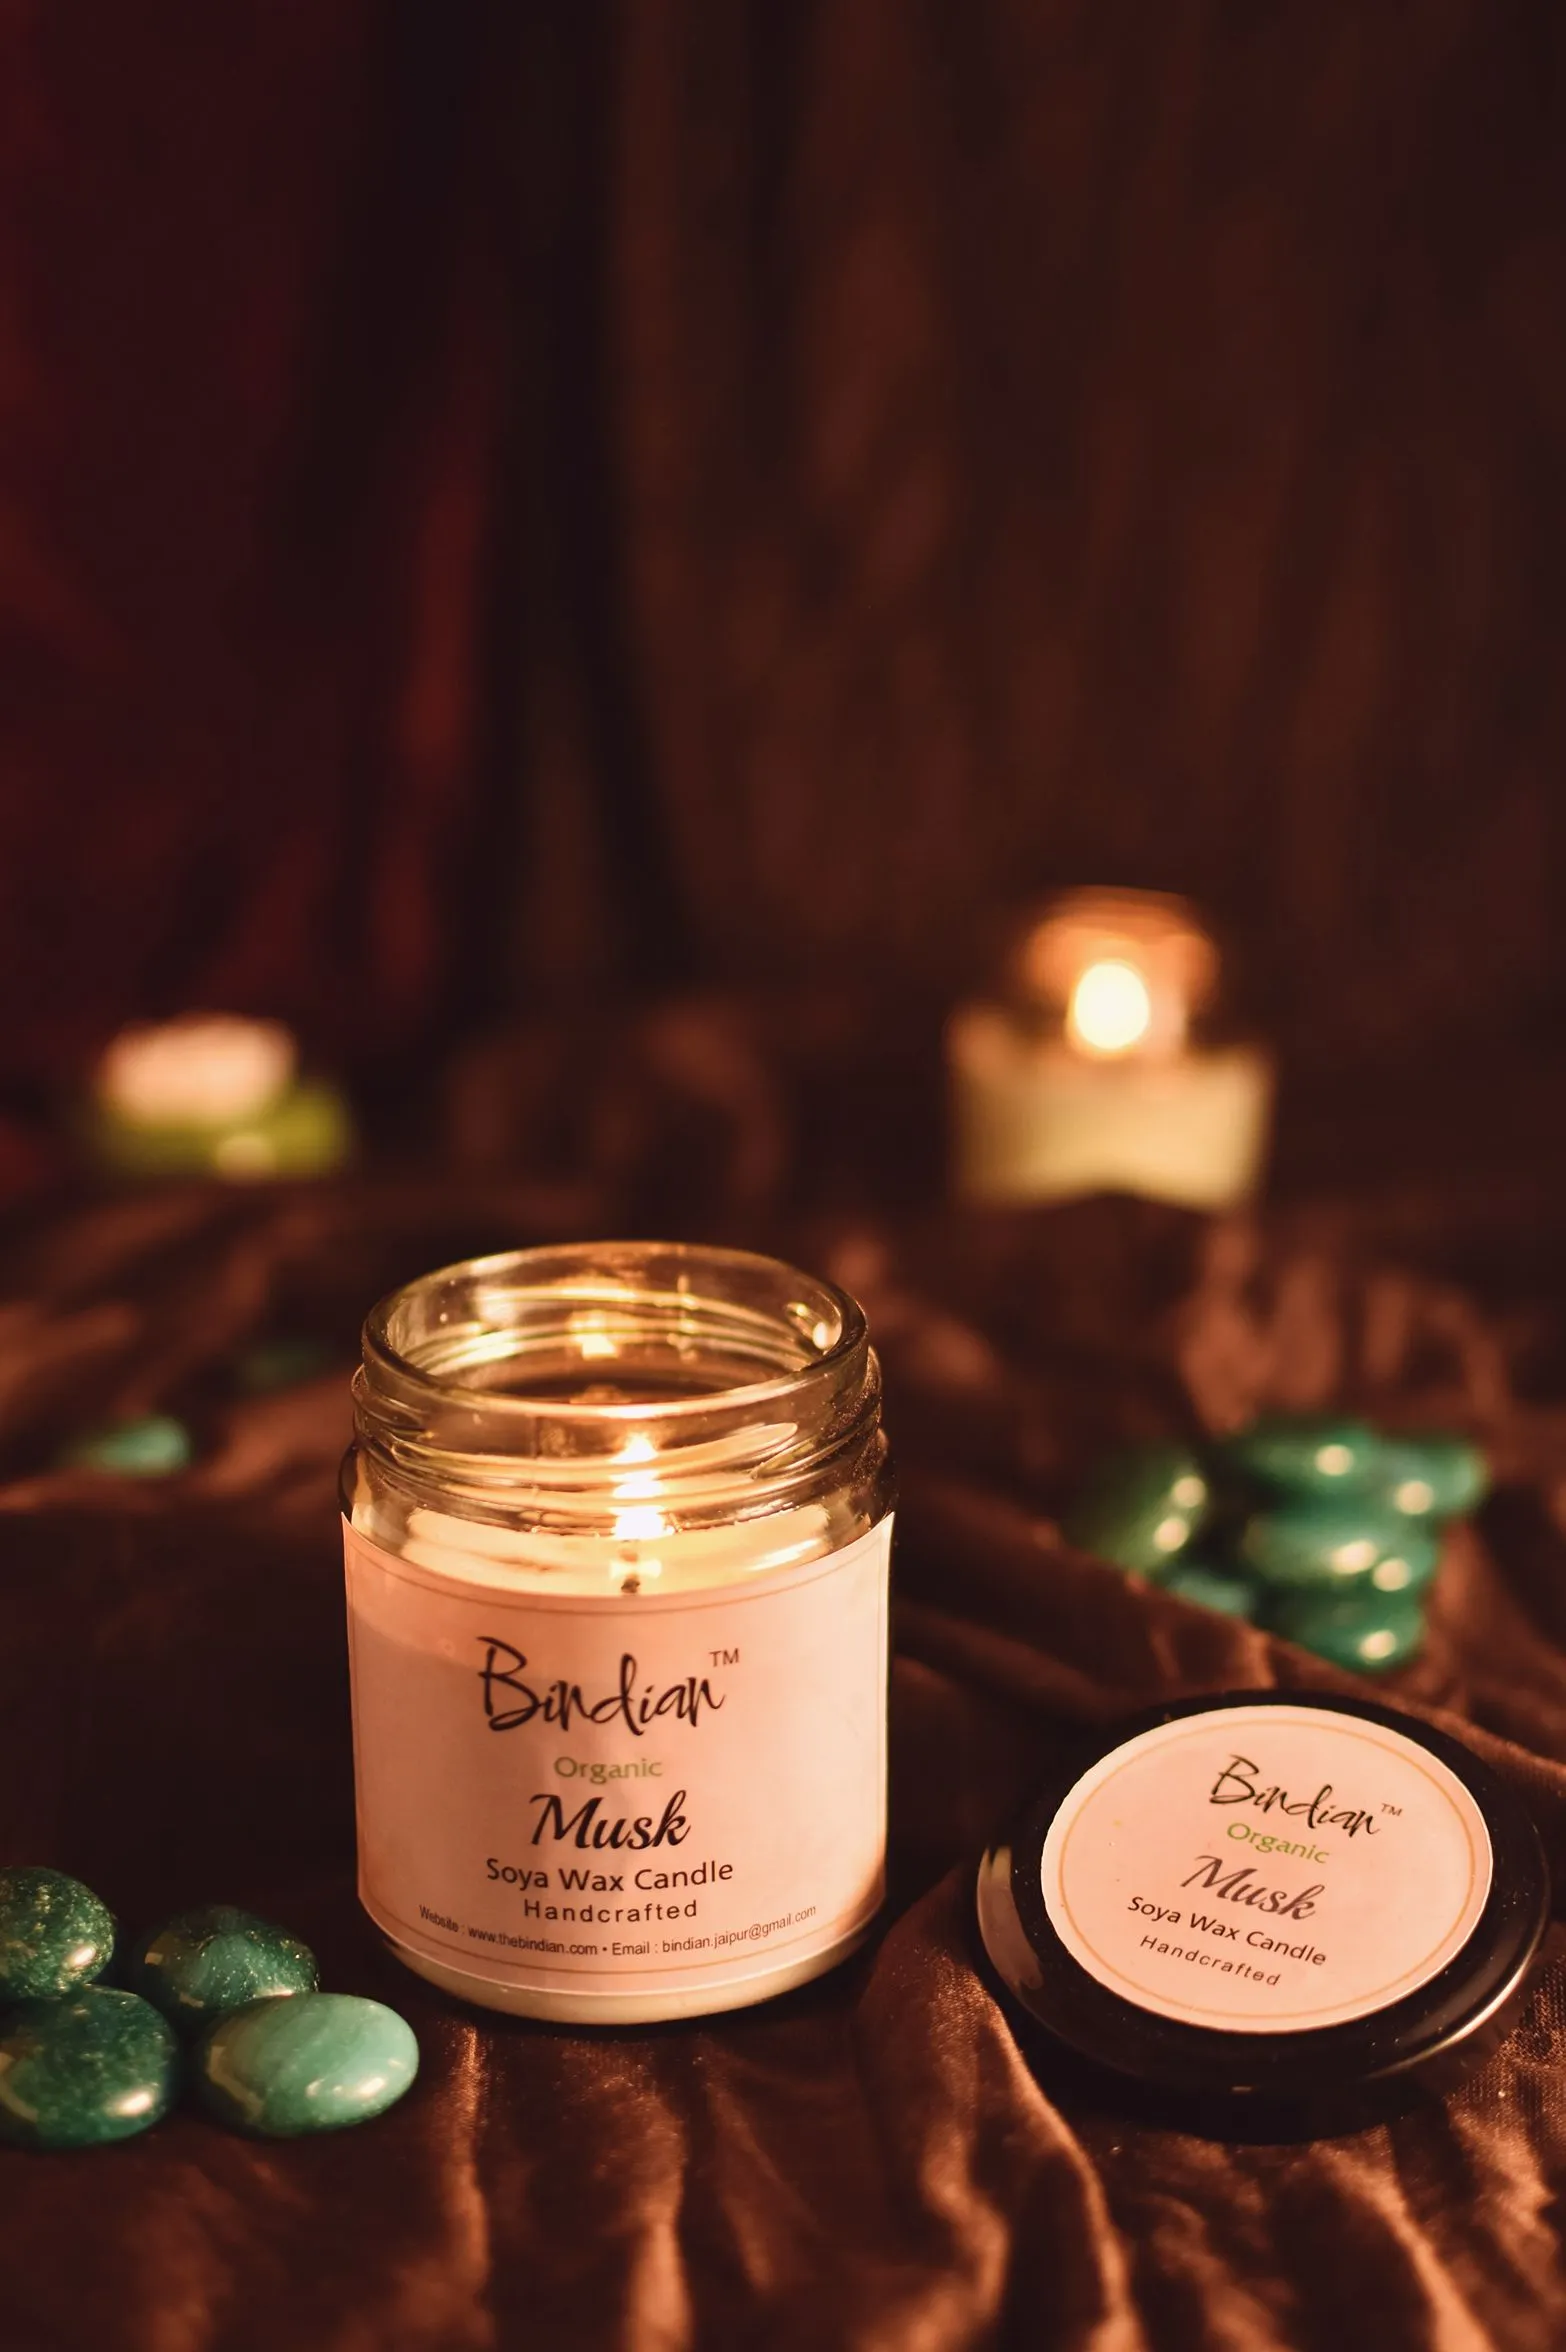 Premium Musk Scented Candle, 24 Hours Long Burning Time